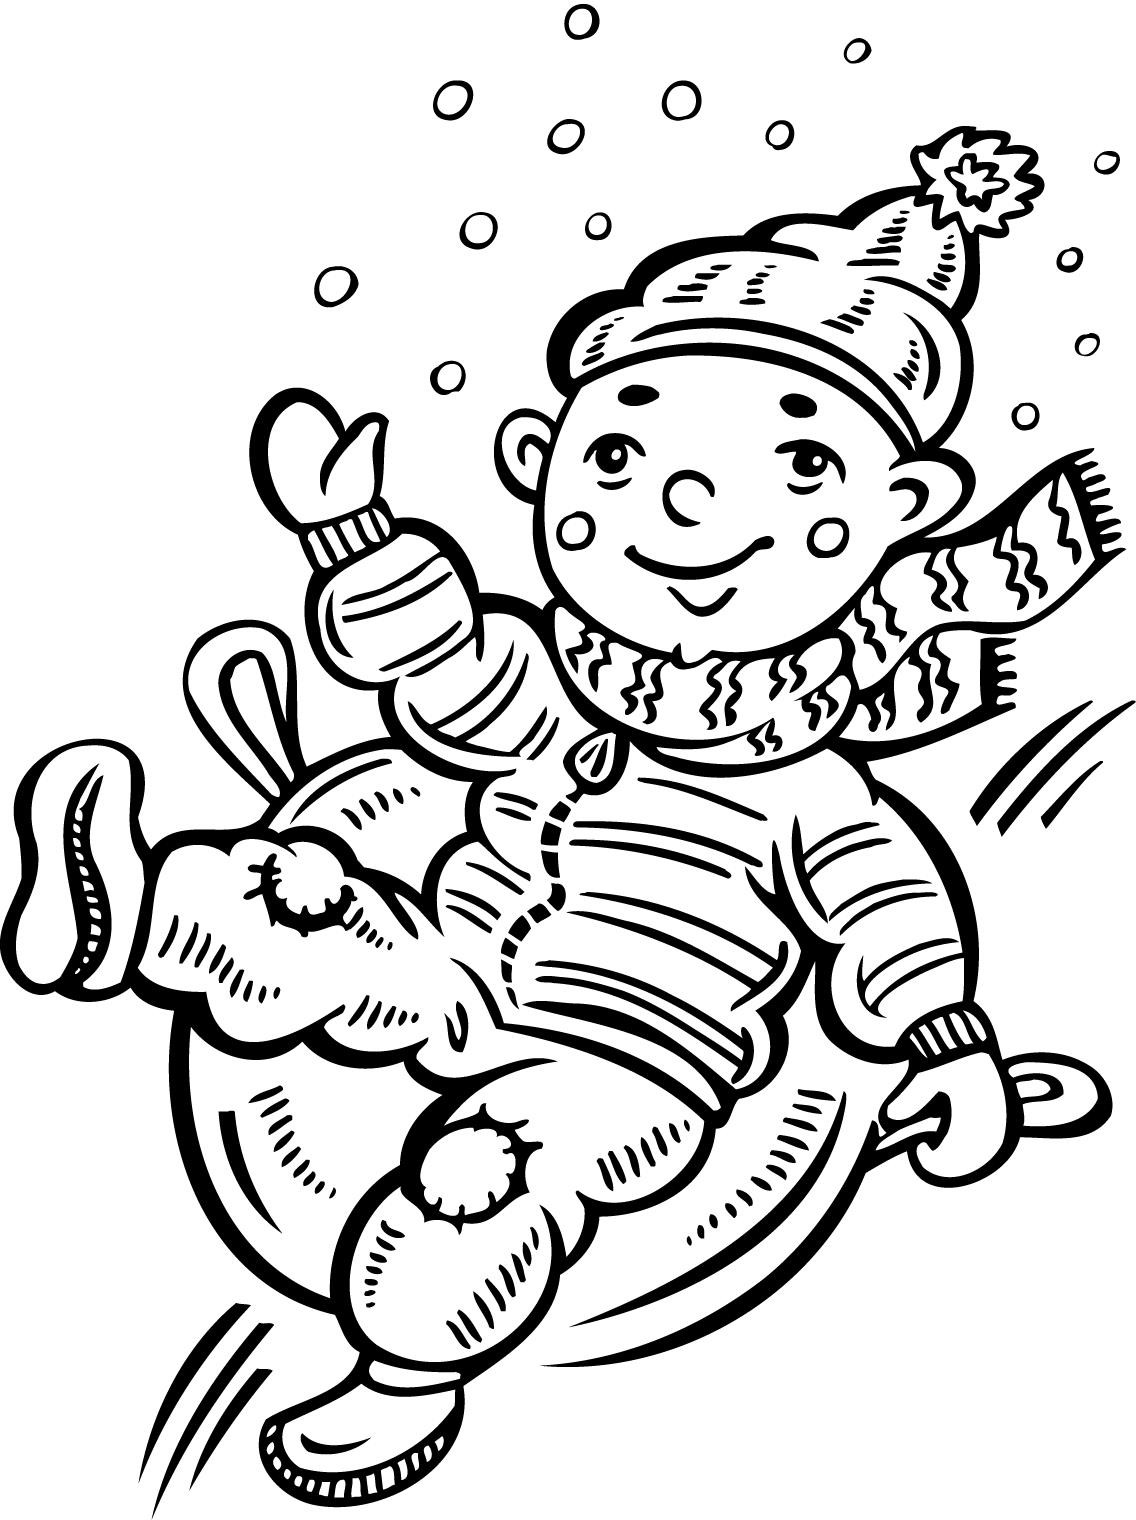 Child Coloring Pages
 colouring sheets of a child sliding down a snow covered hill